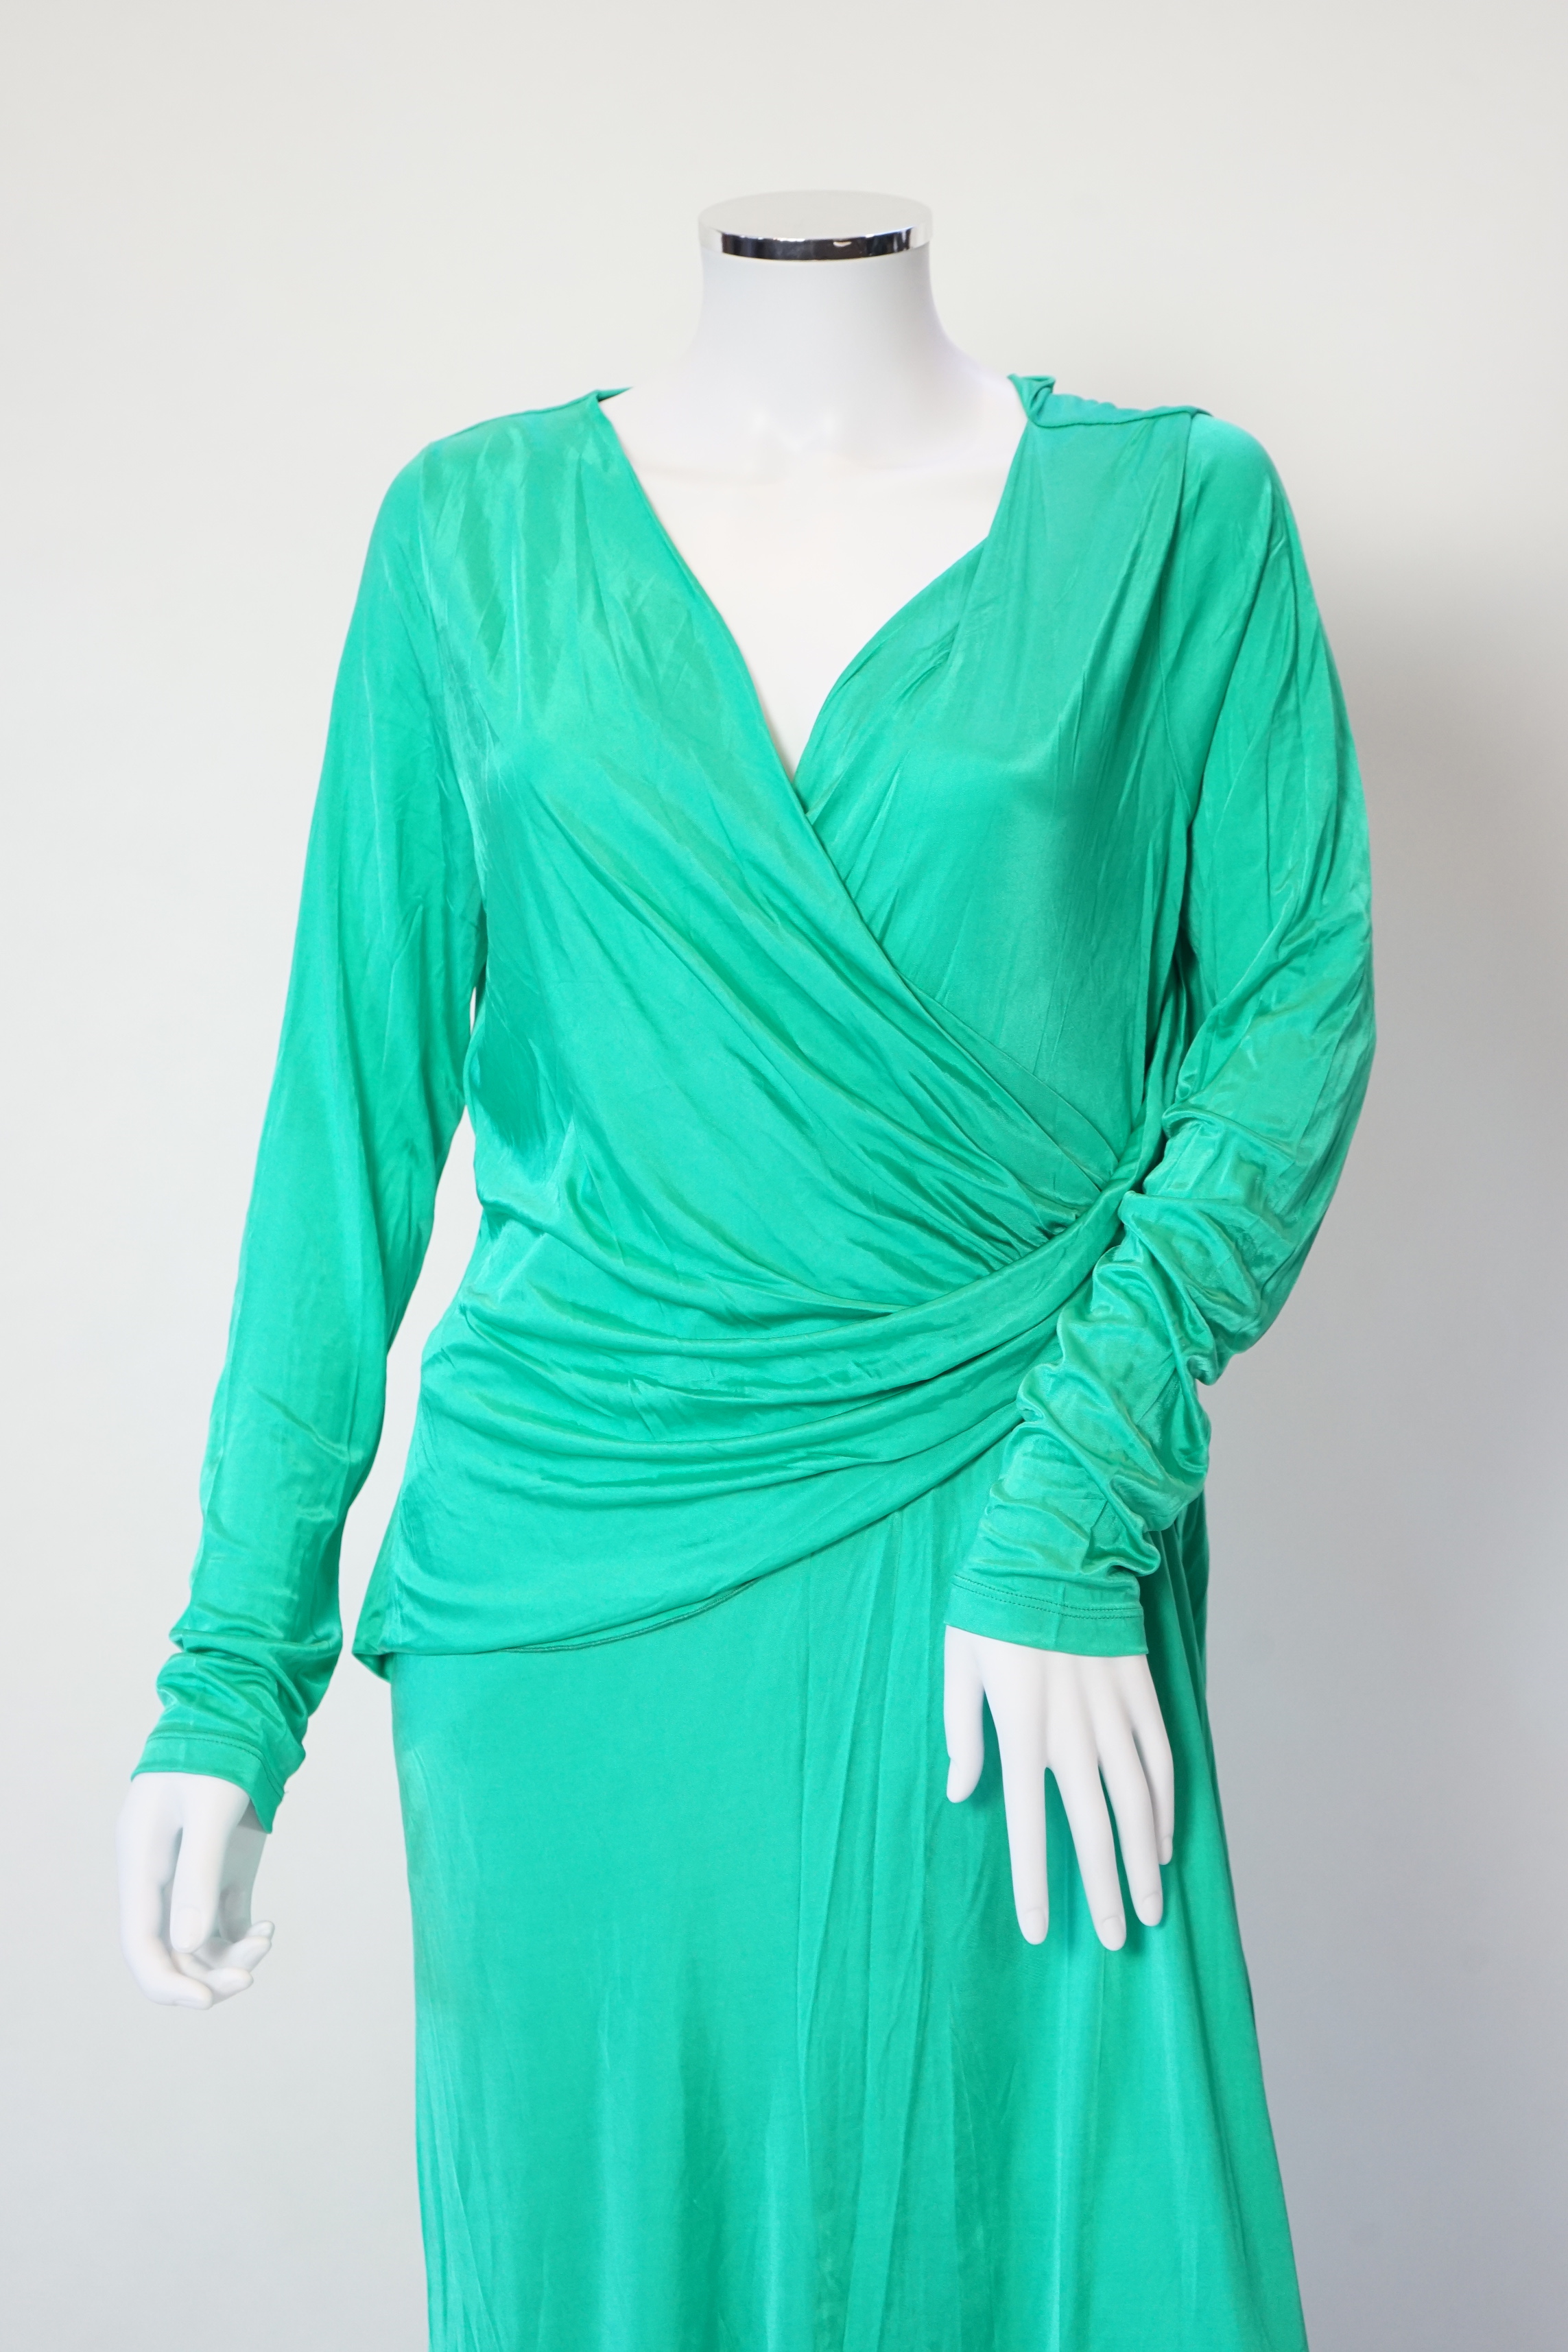 A Versace Collection green long dress and gold and yellow biker style jacket, dress size 52 and jacket size Medium